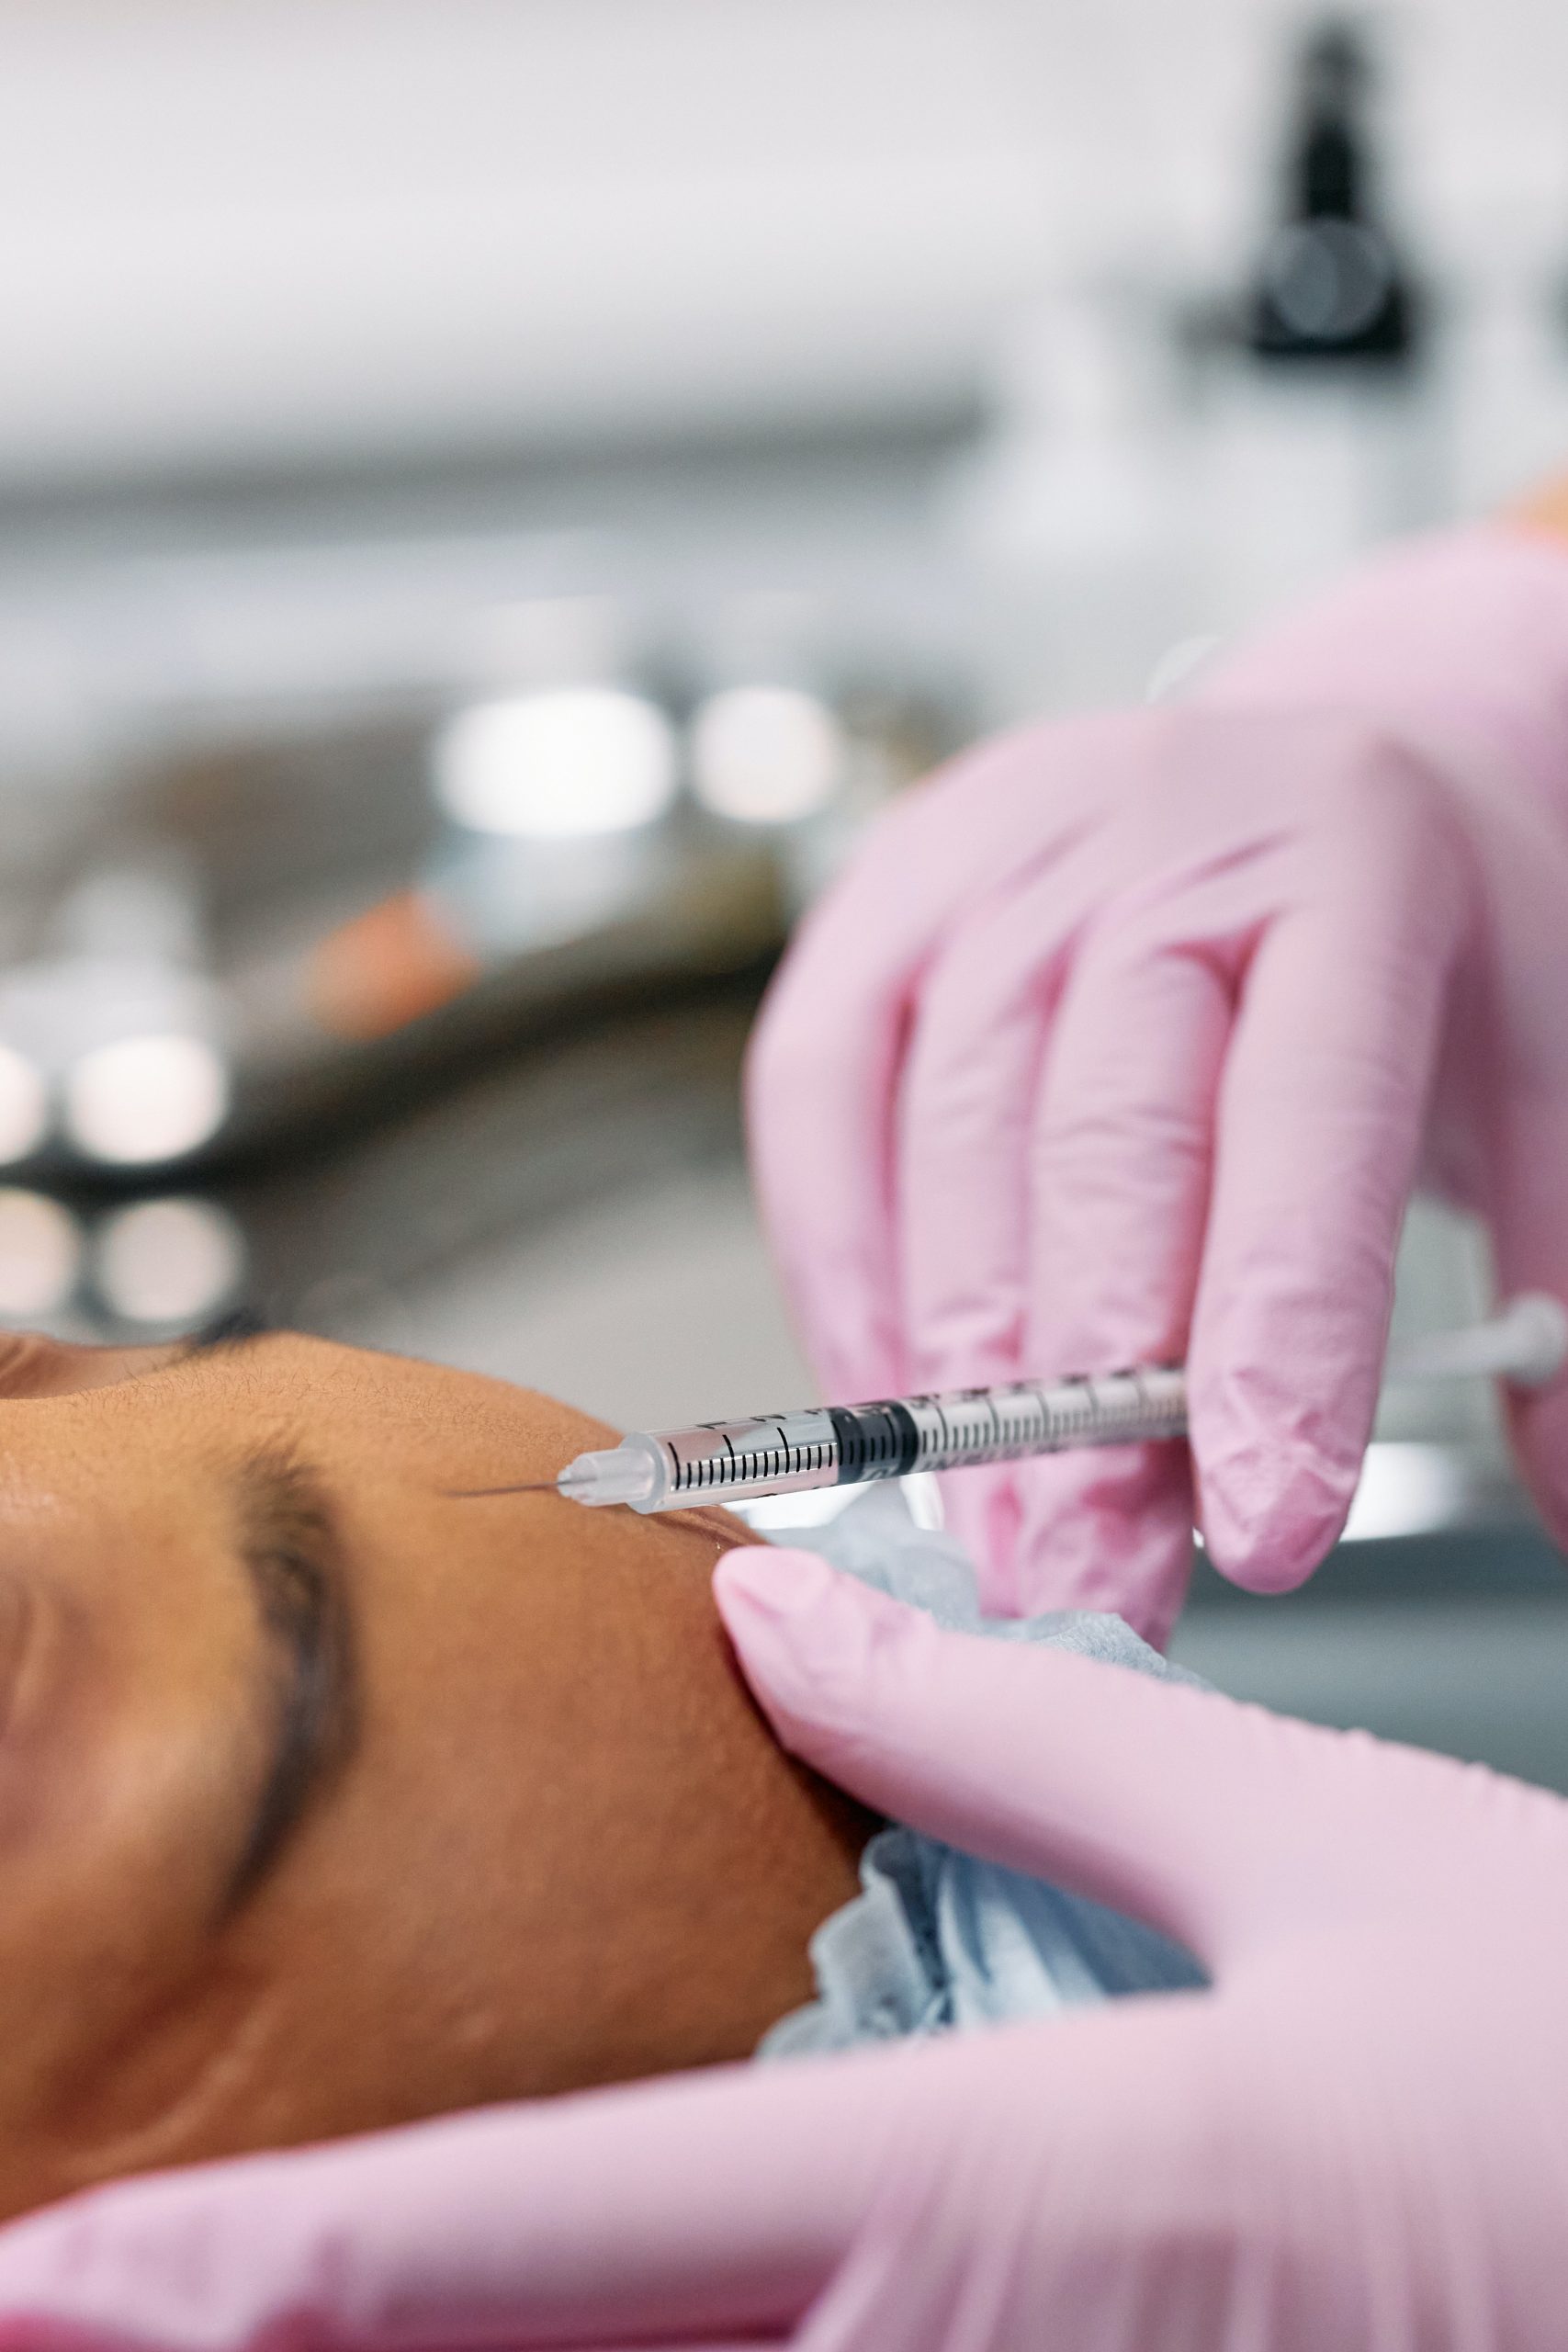 What Is The Best Age To Get Botox?